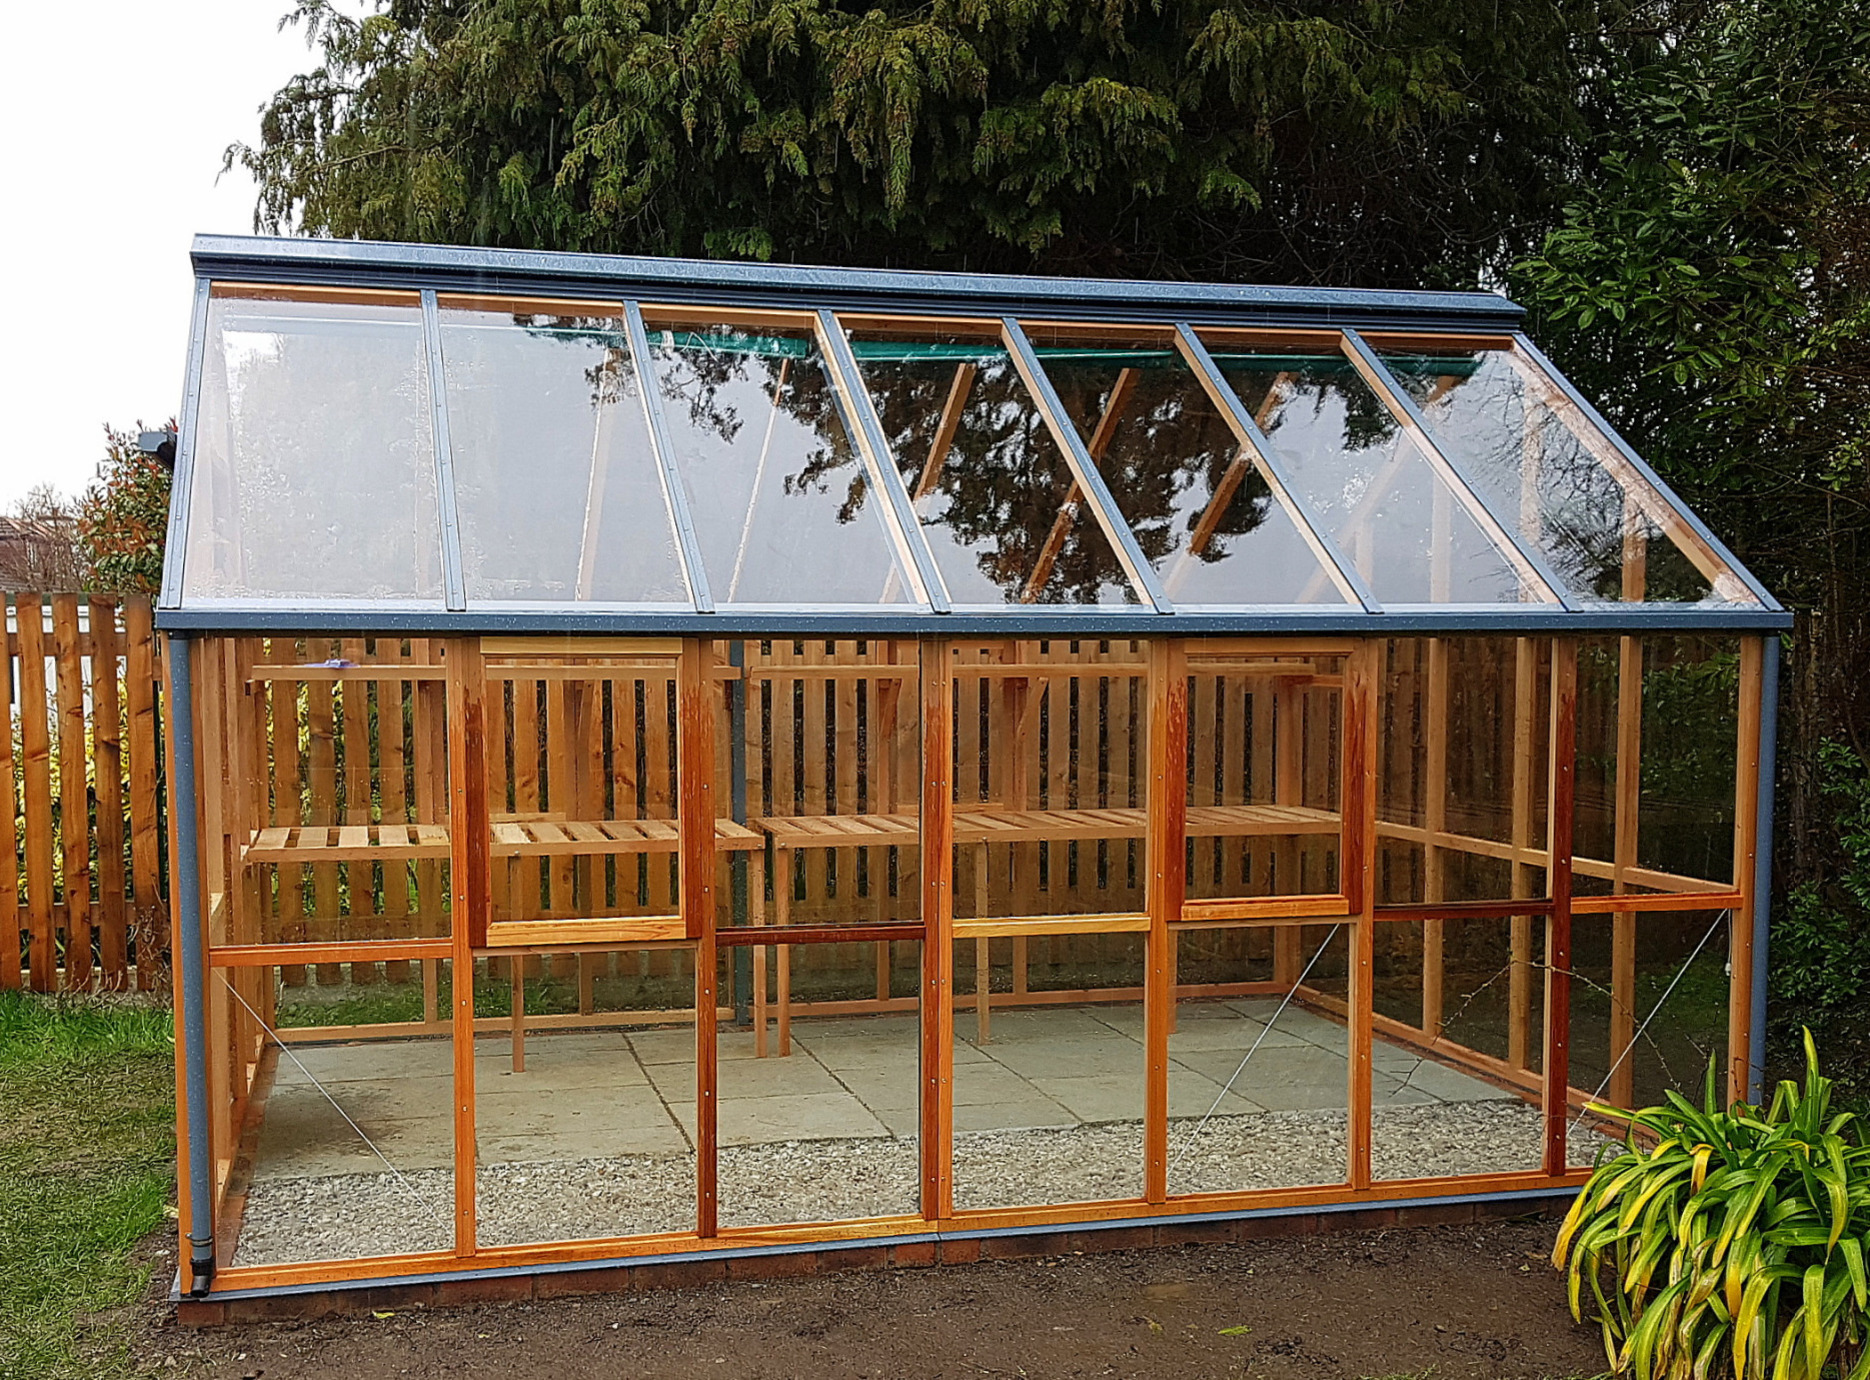 Gabriel Ash Classic 10 x 14 Greenhouse in Churchtown, Dublin 14 | the only timber greenhouses endorsed by the RHS | Owen Chubb  087-2306128